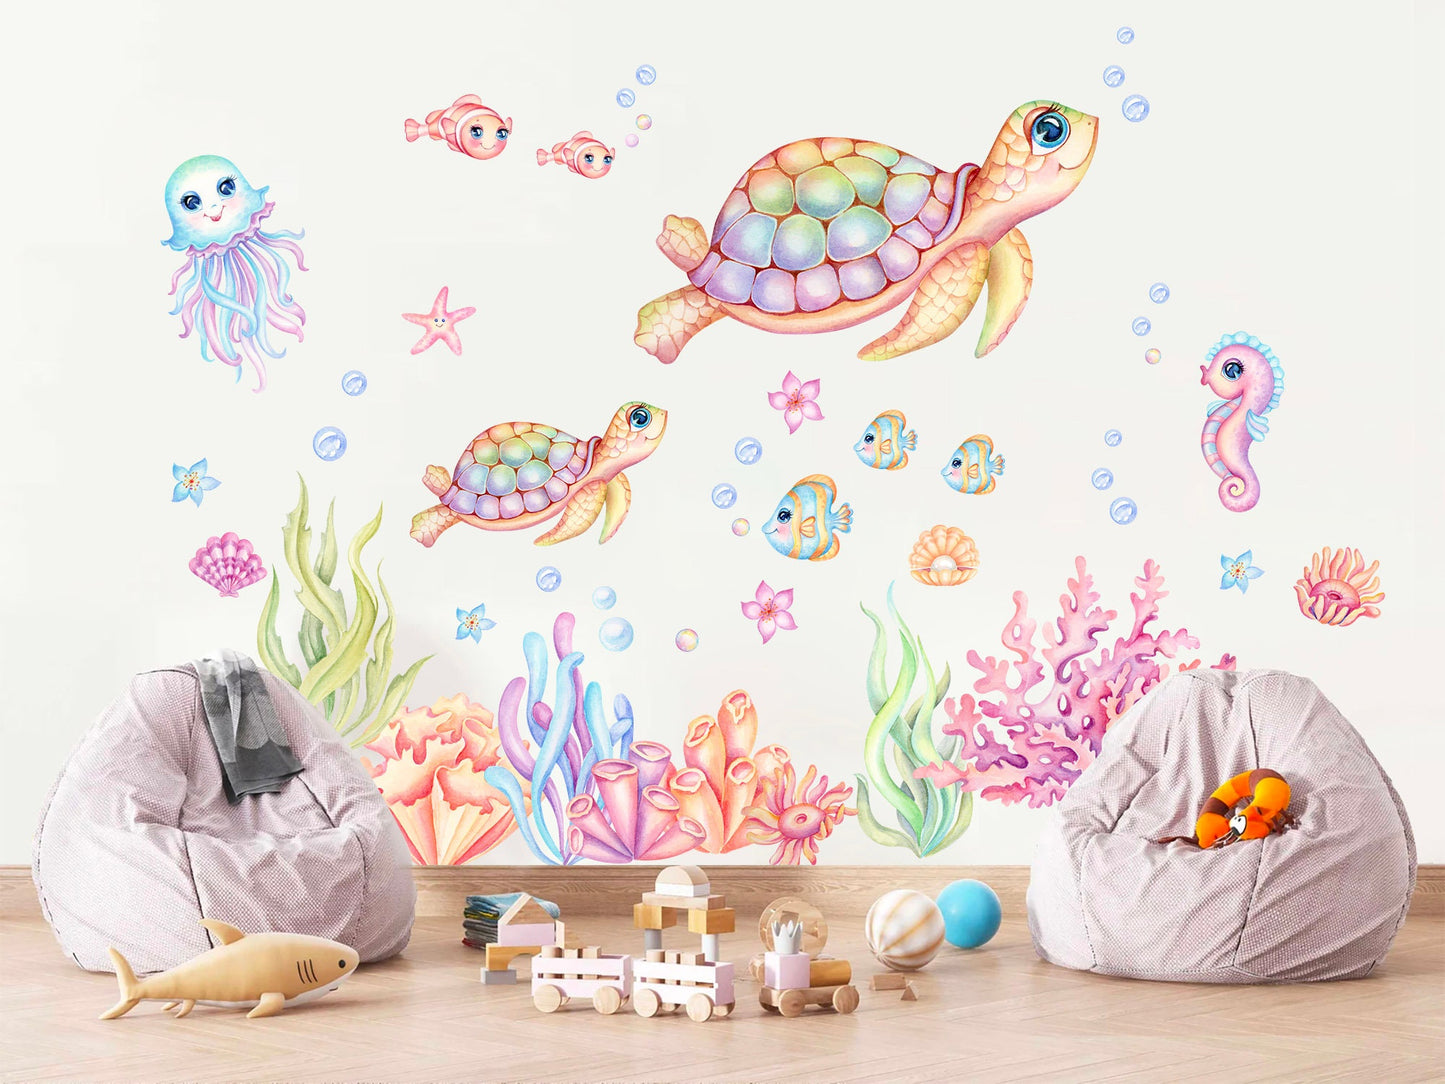 Pink Green Undersea Adventure Wall Decal - Turtle Mom and Baby Play with Octopus and Seahorse Friends - BR306